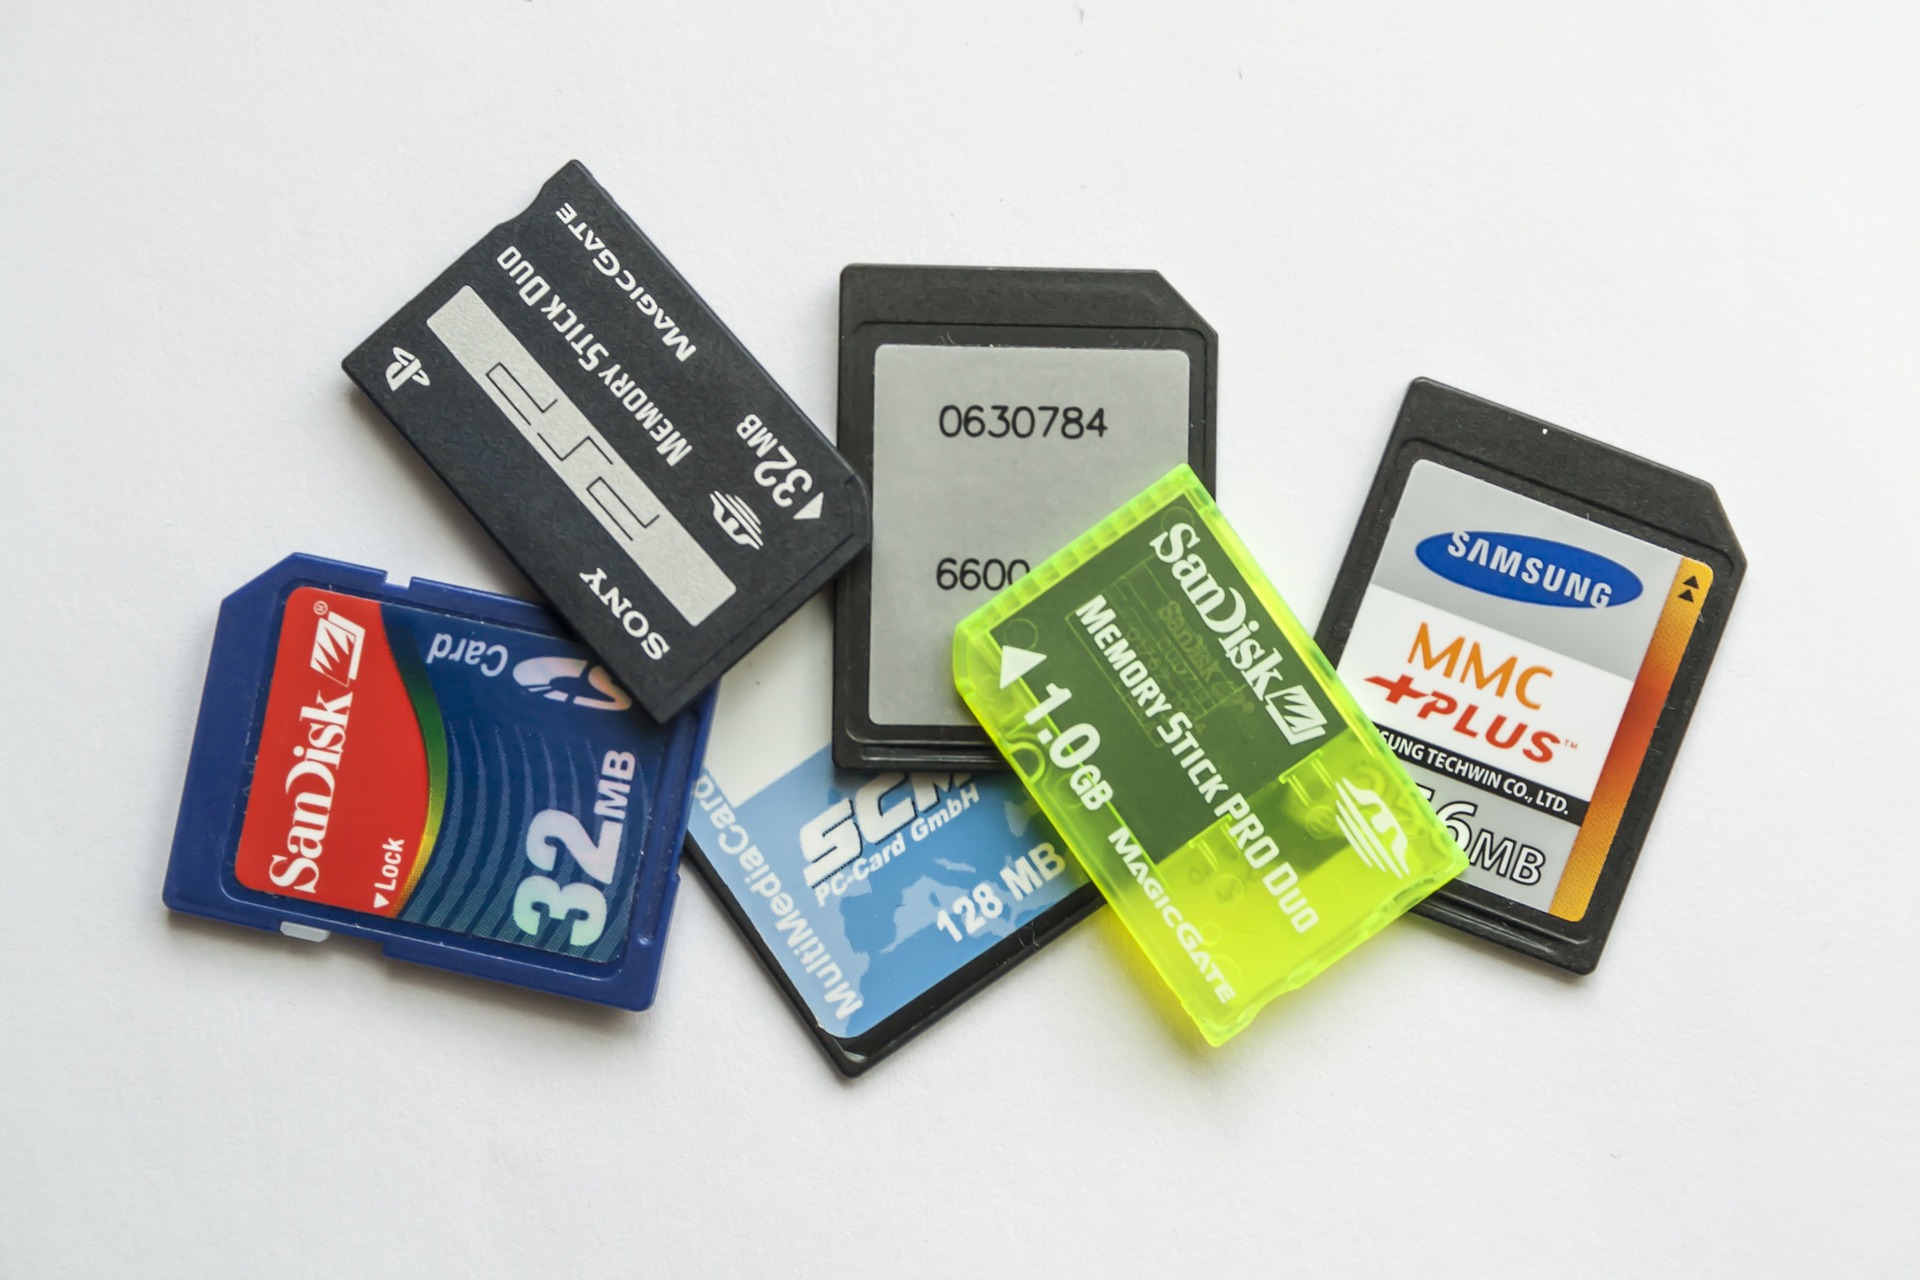 ever-wondered-what-these-symbols-on-your-memory-cards-means